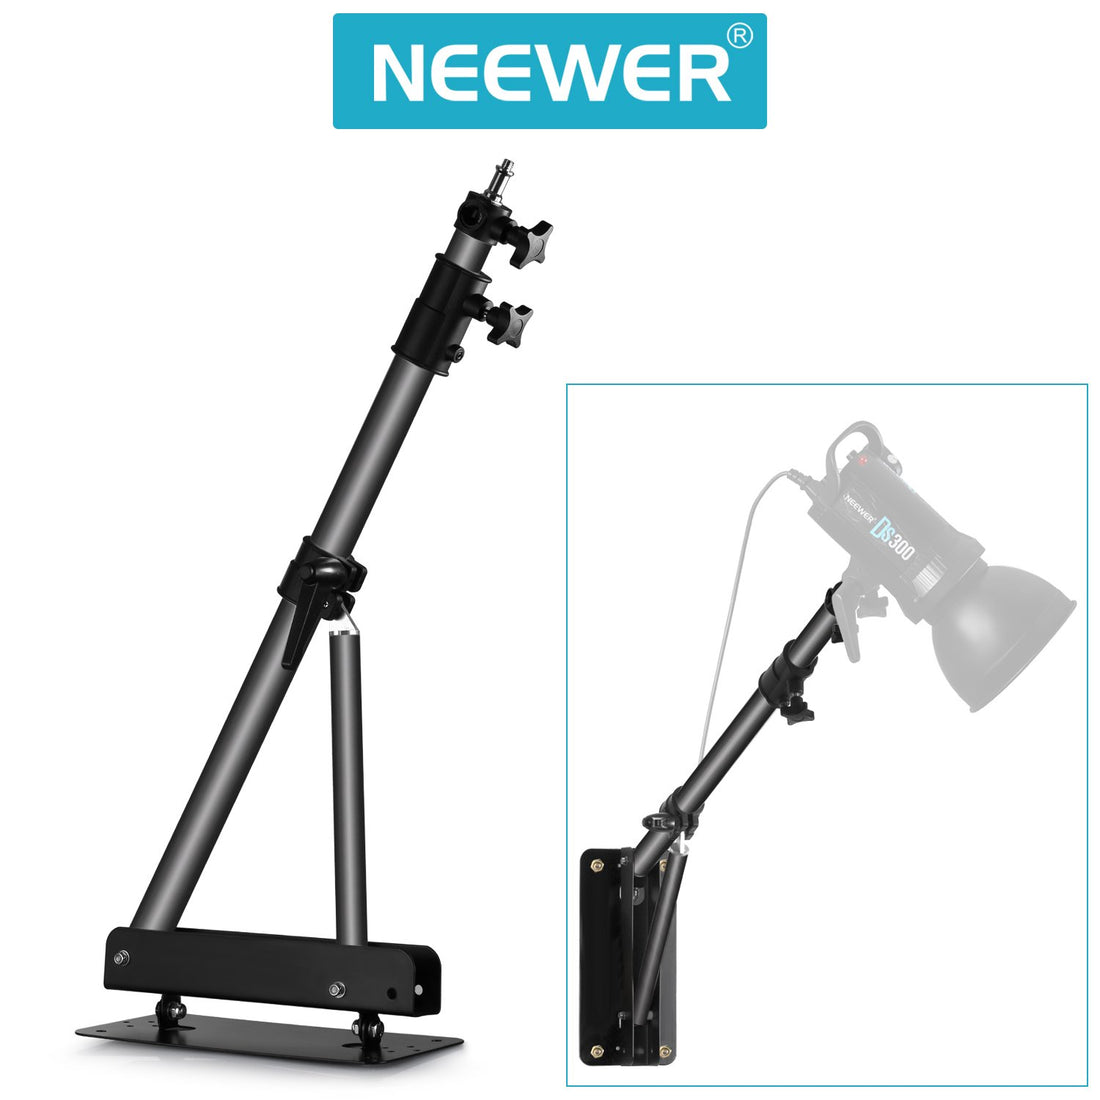 Neewer Wall Mounting Boom Arm with Triangle Base for Photography Studio Video Strobe Light Monolight Softbox Umbrella Reflector, 180 Degree Rotation, Max Length 66.5 inches/169centimeters (Black)